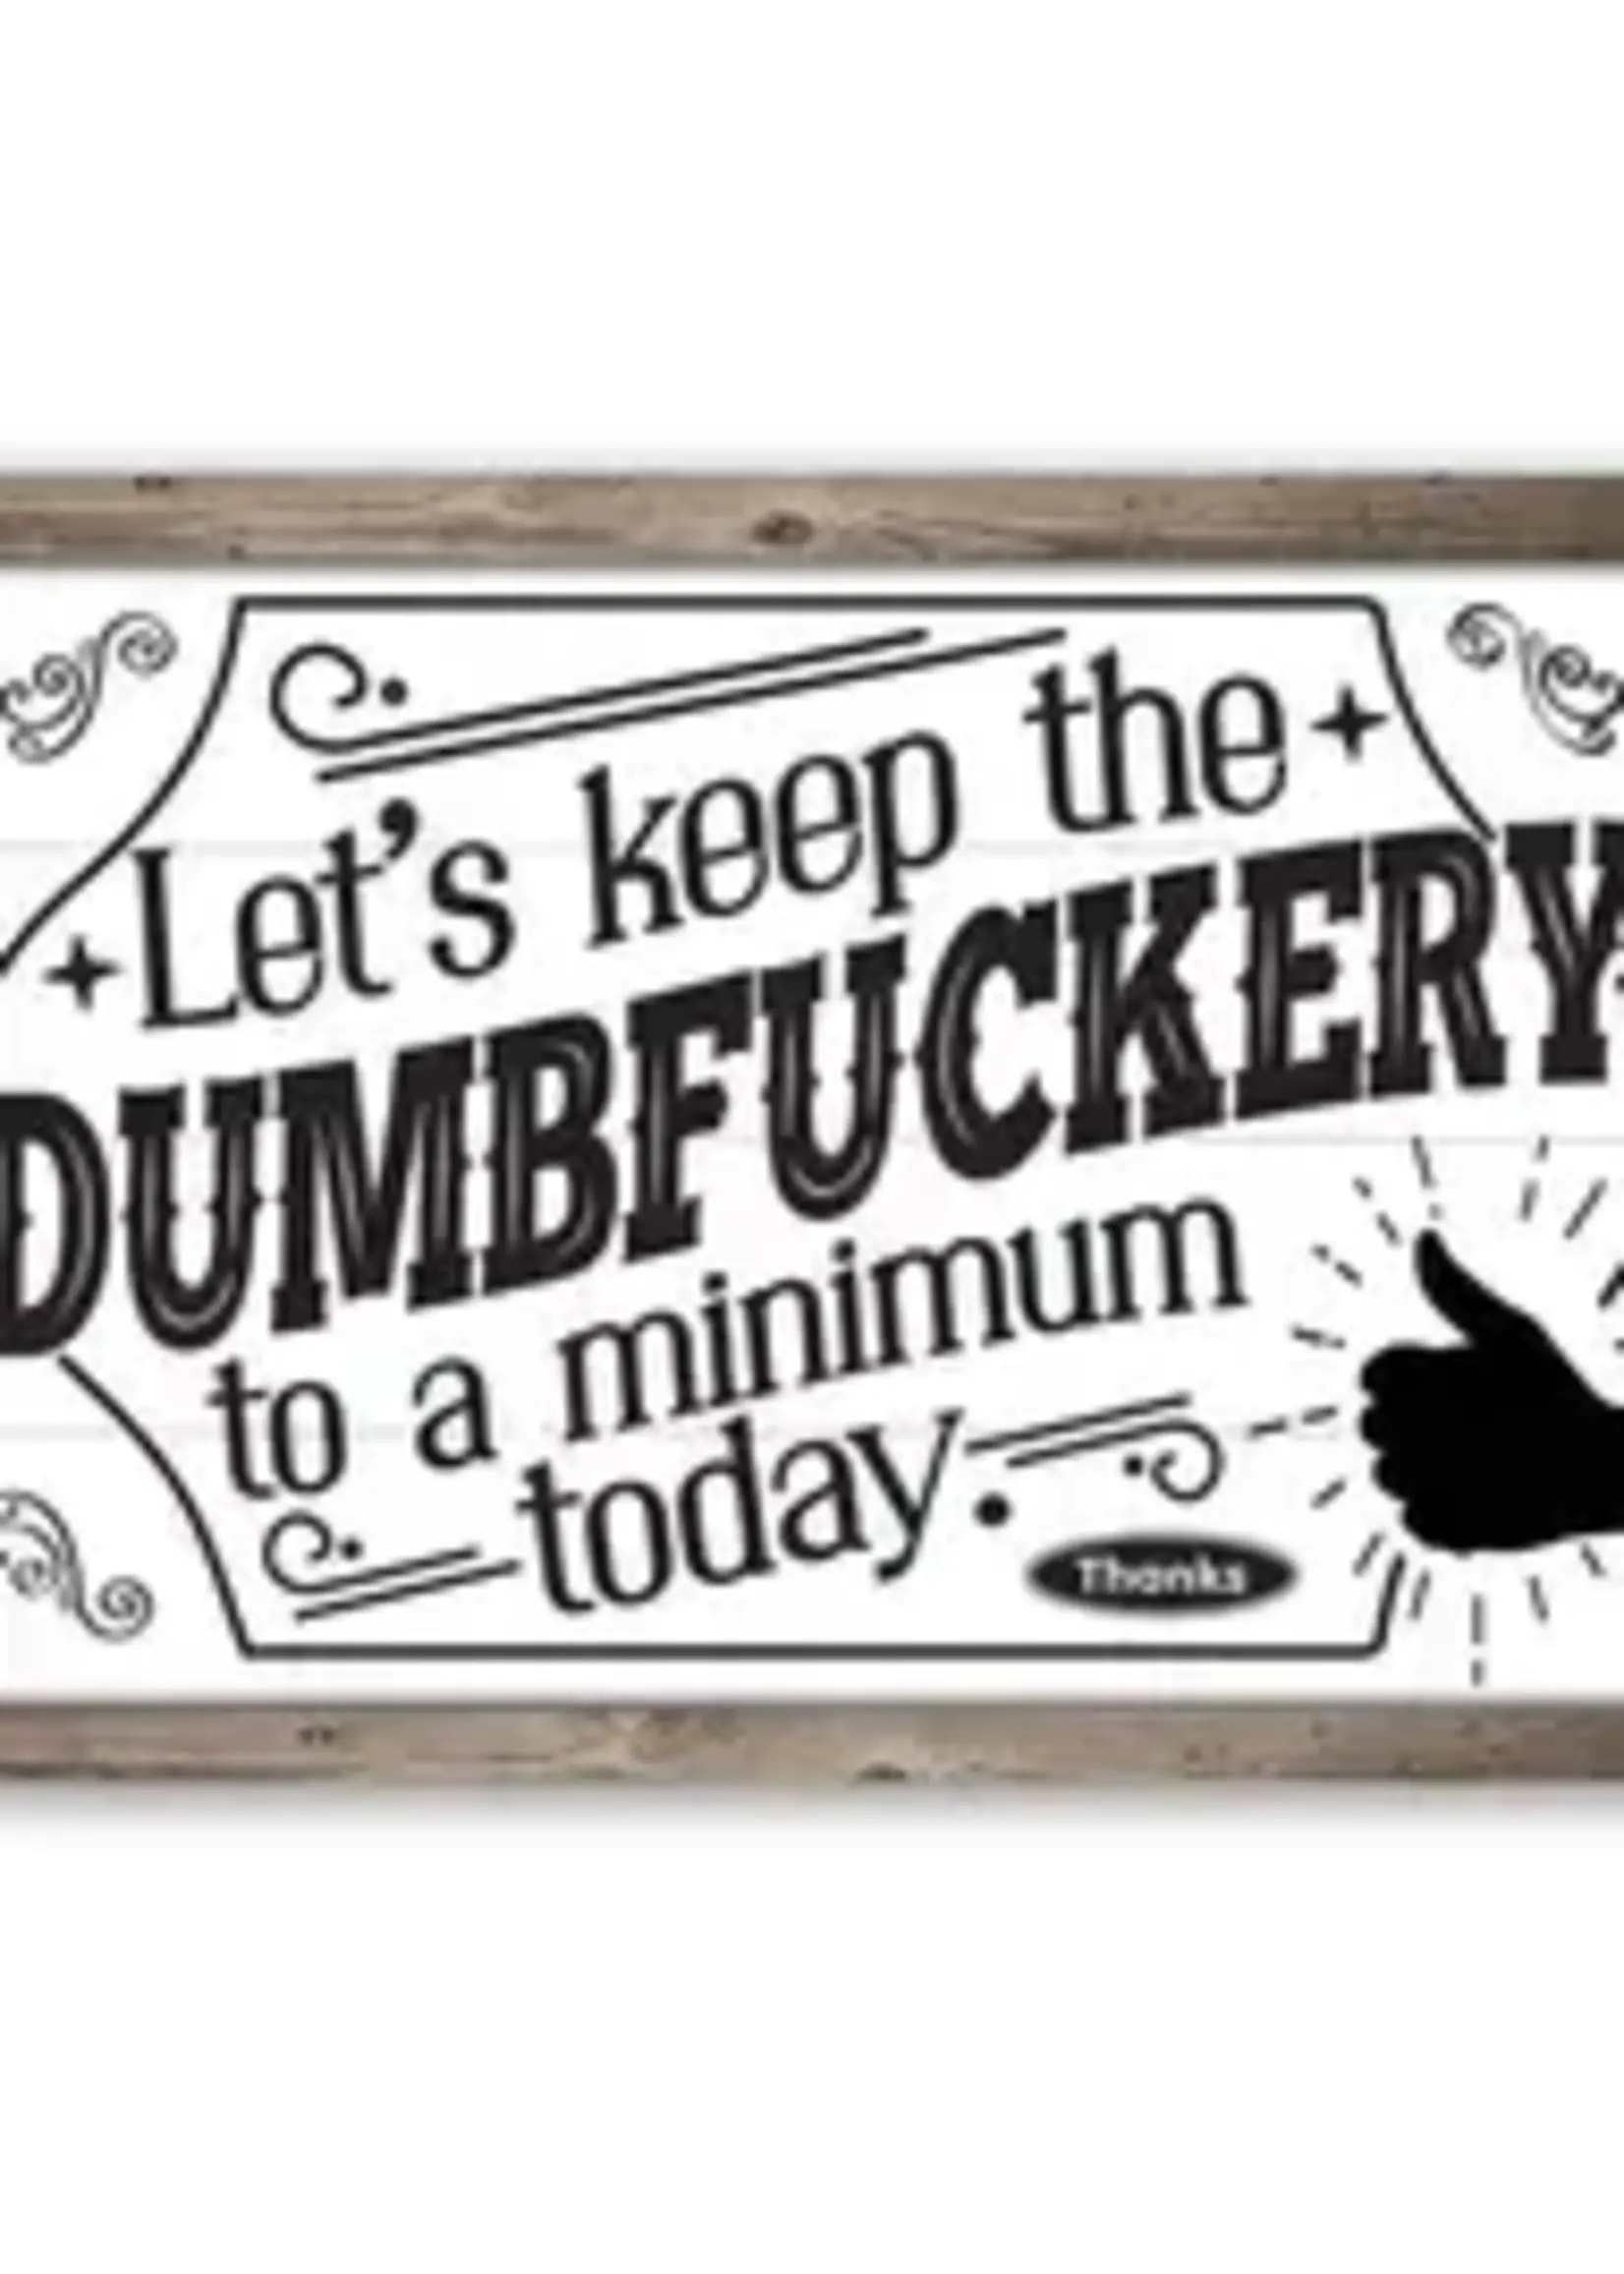 Lone Star Art Let's Keep the Dumbfxxxxxxx - Metal Sign Large